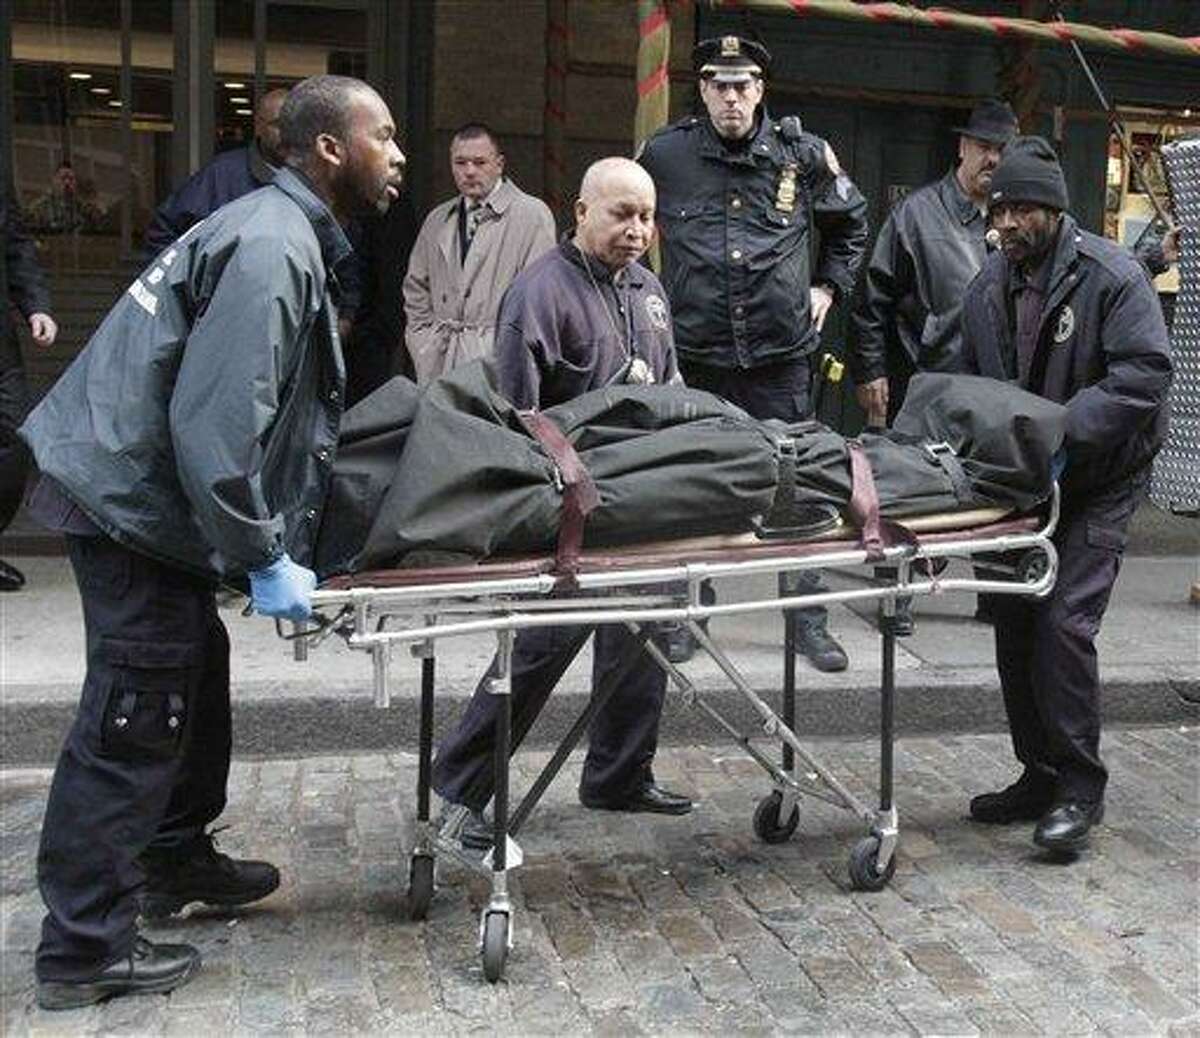 Medical examiner staff remove the body of Mark Madoff from the apartment building in which he lived, Saturday, Dec. 11, 2010 in the Soho neighborhood of New York. Mark Madoff, the eldest son of disgraced financier Bernard Madoff, hanged himself by a dog leash in his apartment Saturday after two years of "unrelenting pressure" following his father's arrest in a multibillion-dollar fraud that enveloped the entire family, law enforcement officials and a family attorney said. (AP Photo/Mary Altaffer)